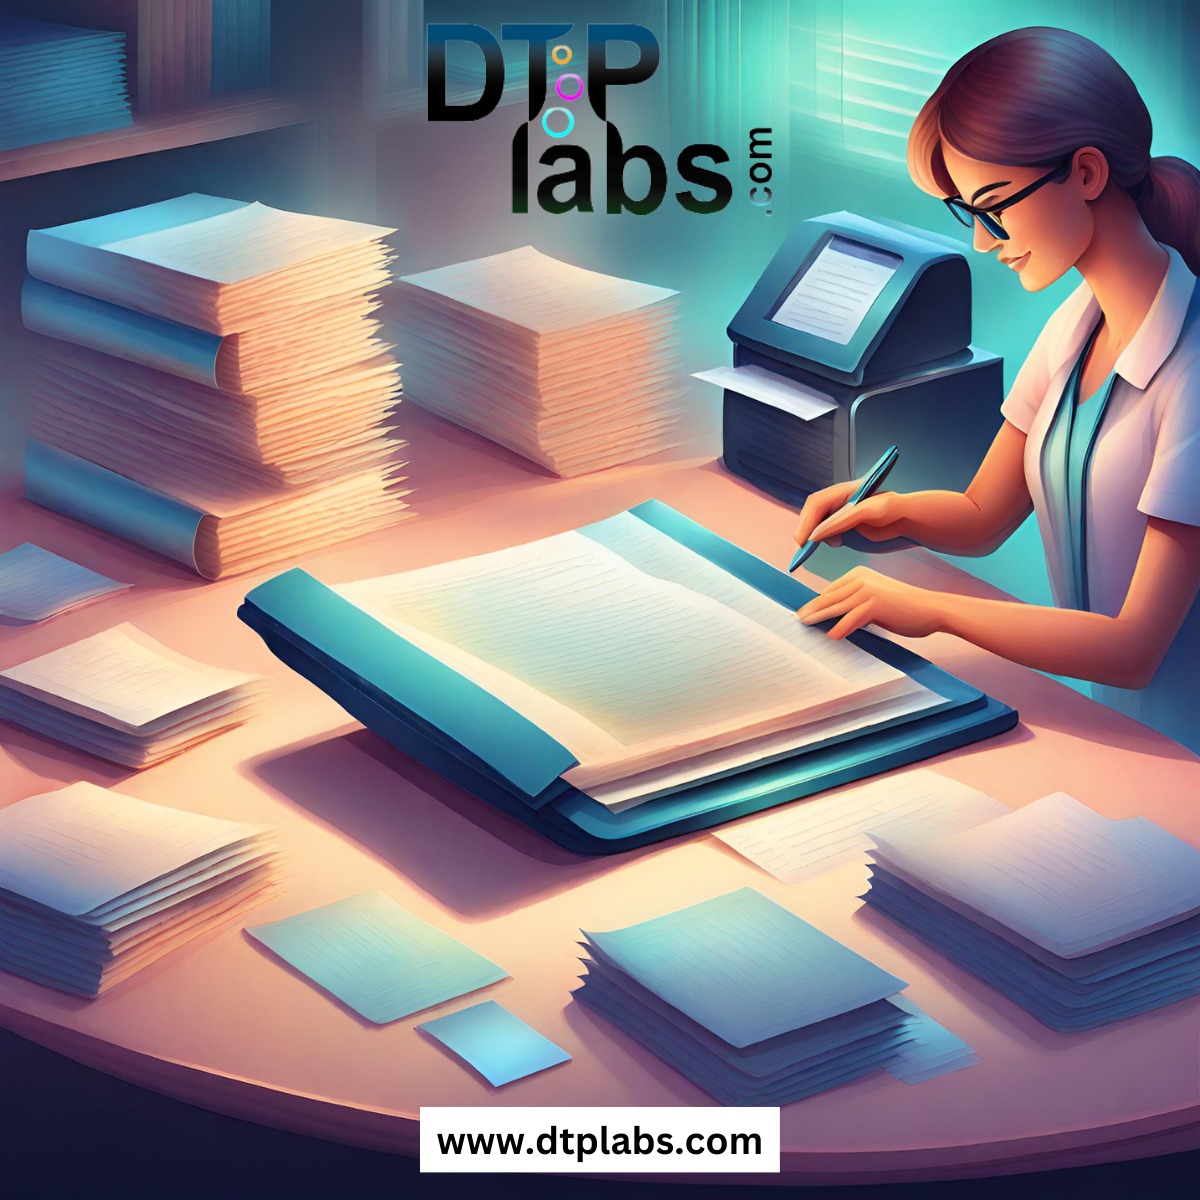 We can prepare PDFs, InDesign, Word, Powerpoint, Framemaker, Quicksilver/Interleaf, Storyline, Rise, etc. files for translation. For more information please visit our website dtplabs.com/file-preparati…, or contact us on email at info@dtplabs.com . . . #filepreparationservices #file